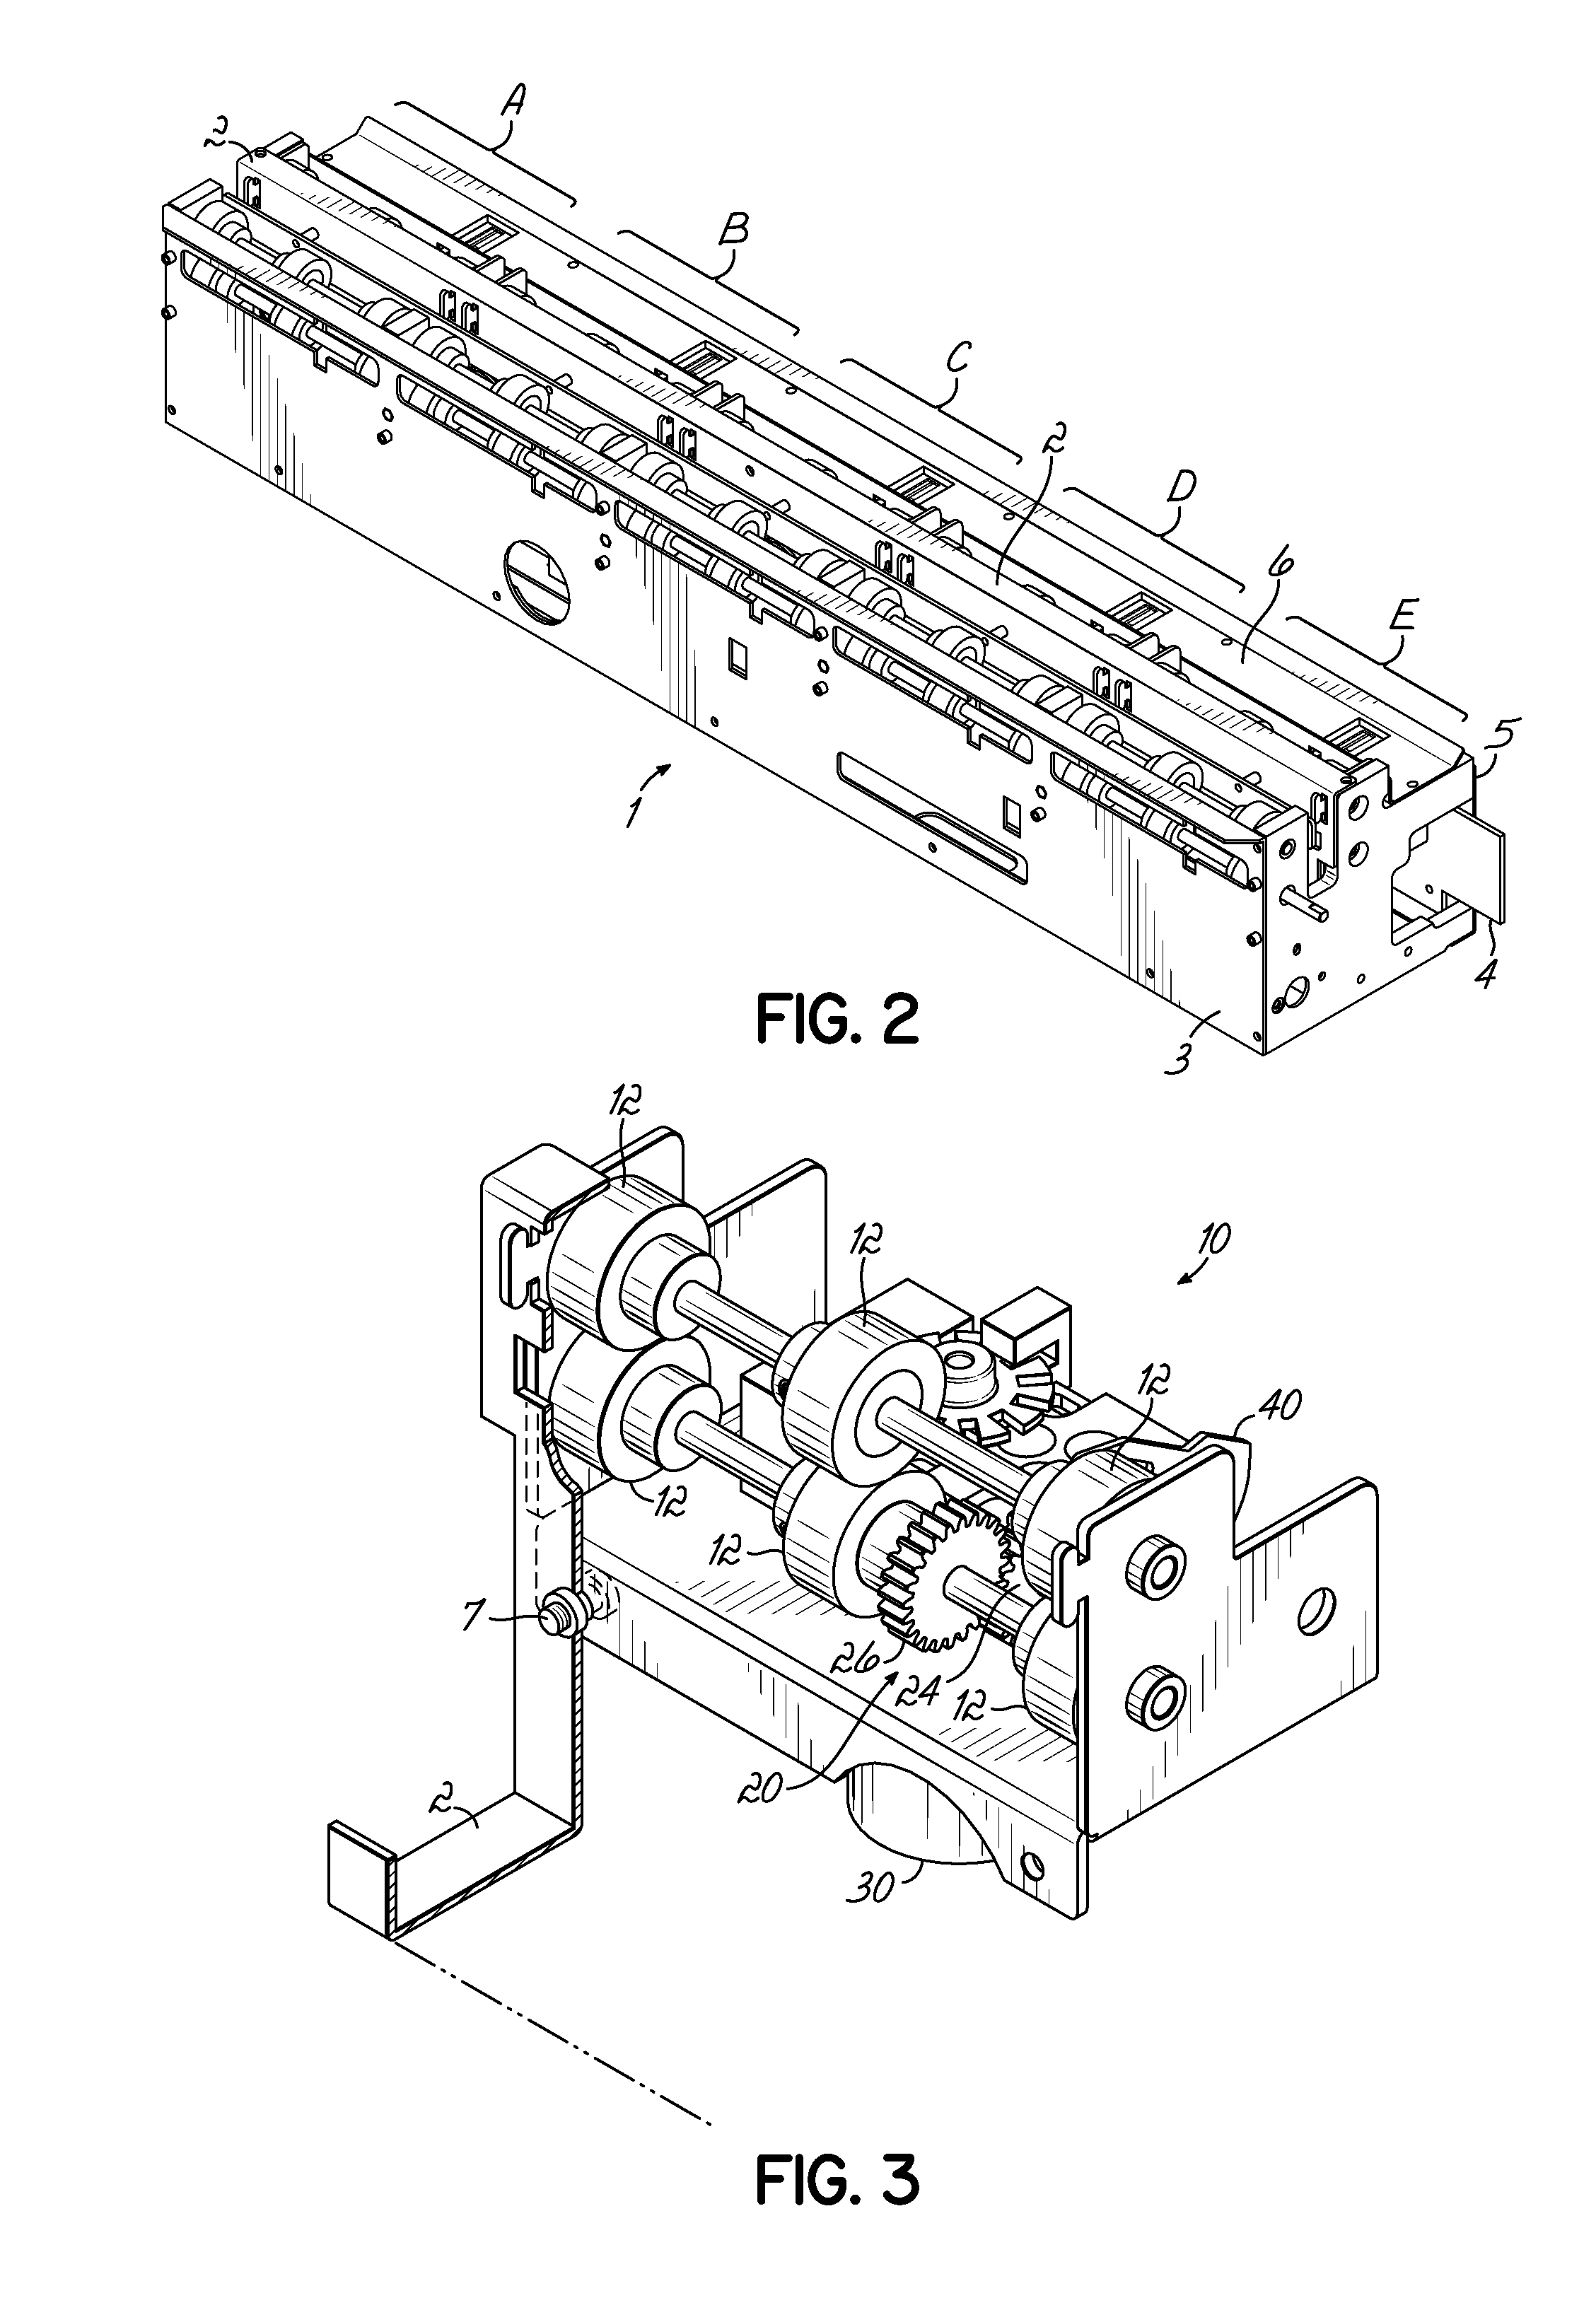 Multi-channel perforated ticket separation mechanism